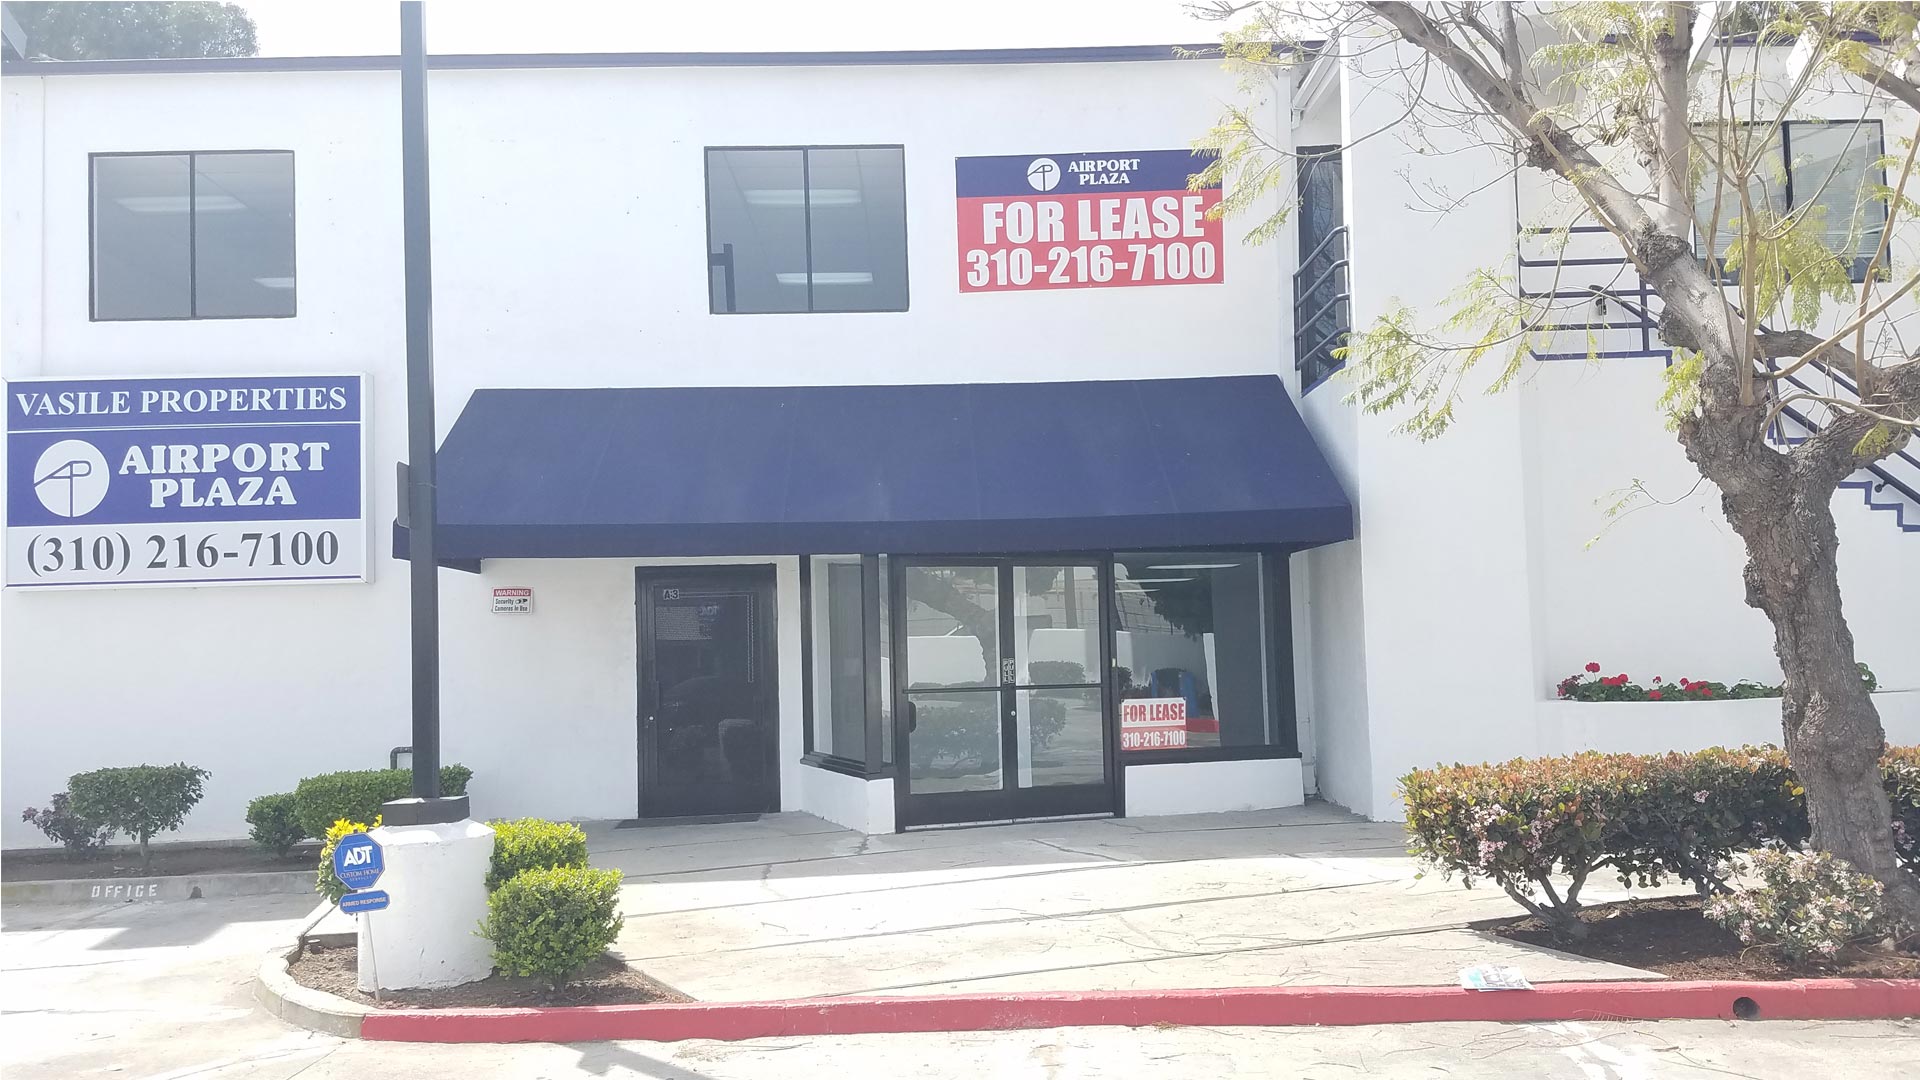 A building with a blue awning and for lease sign.